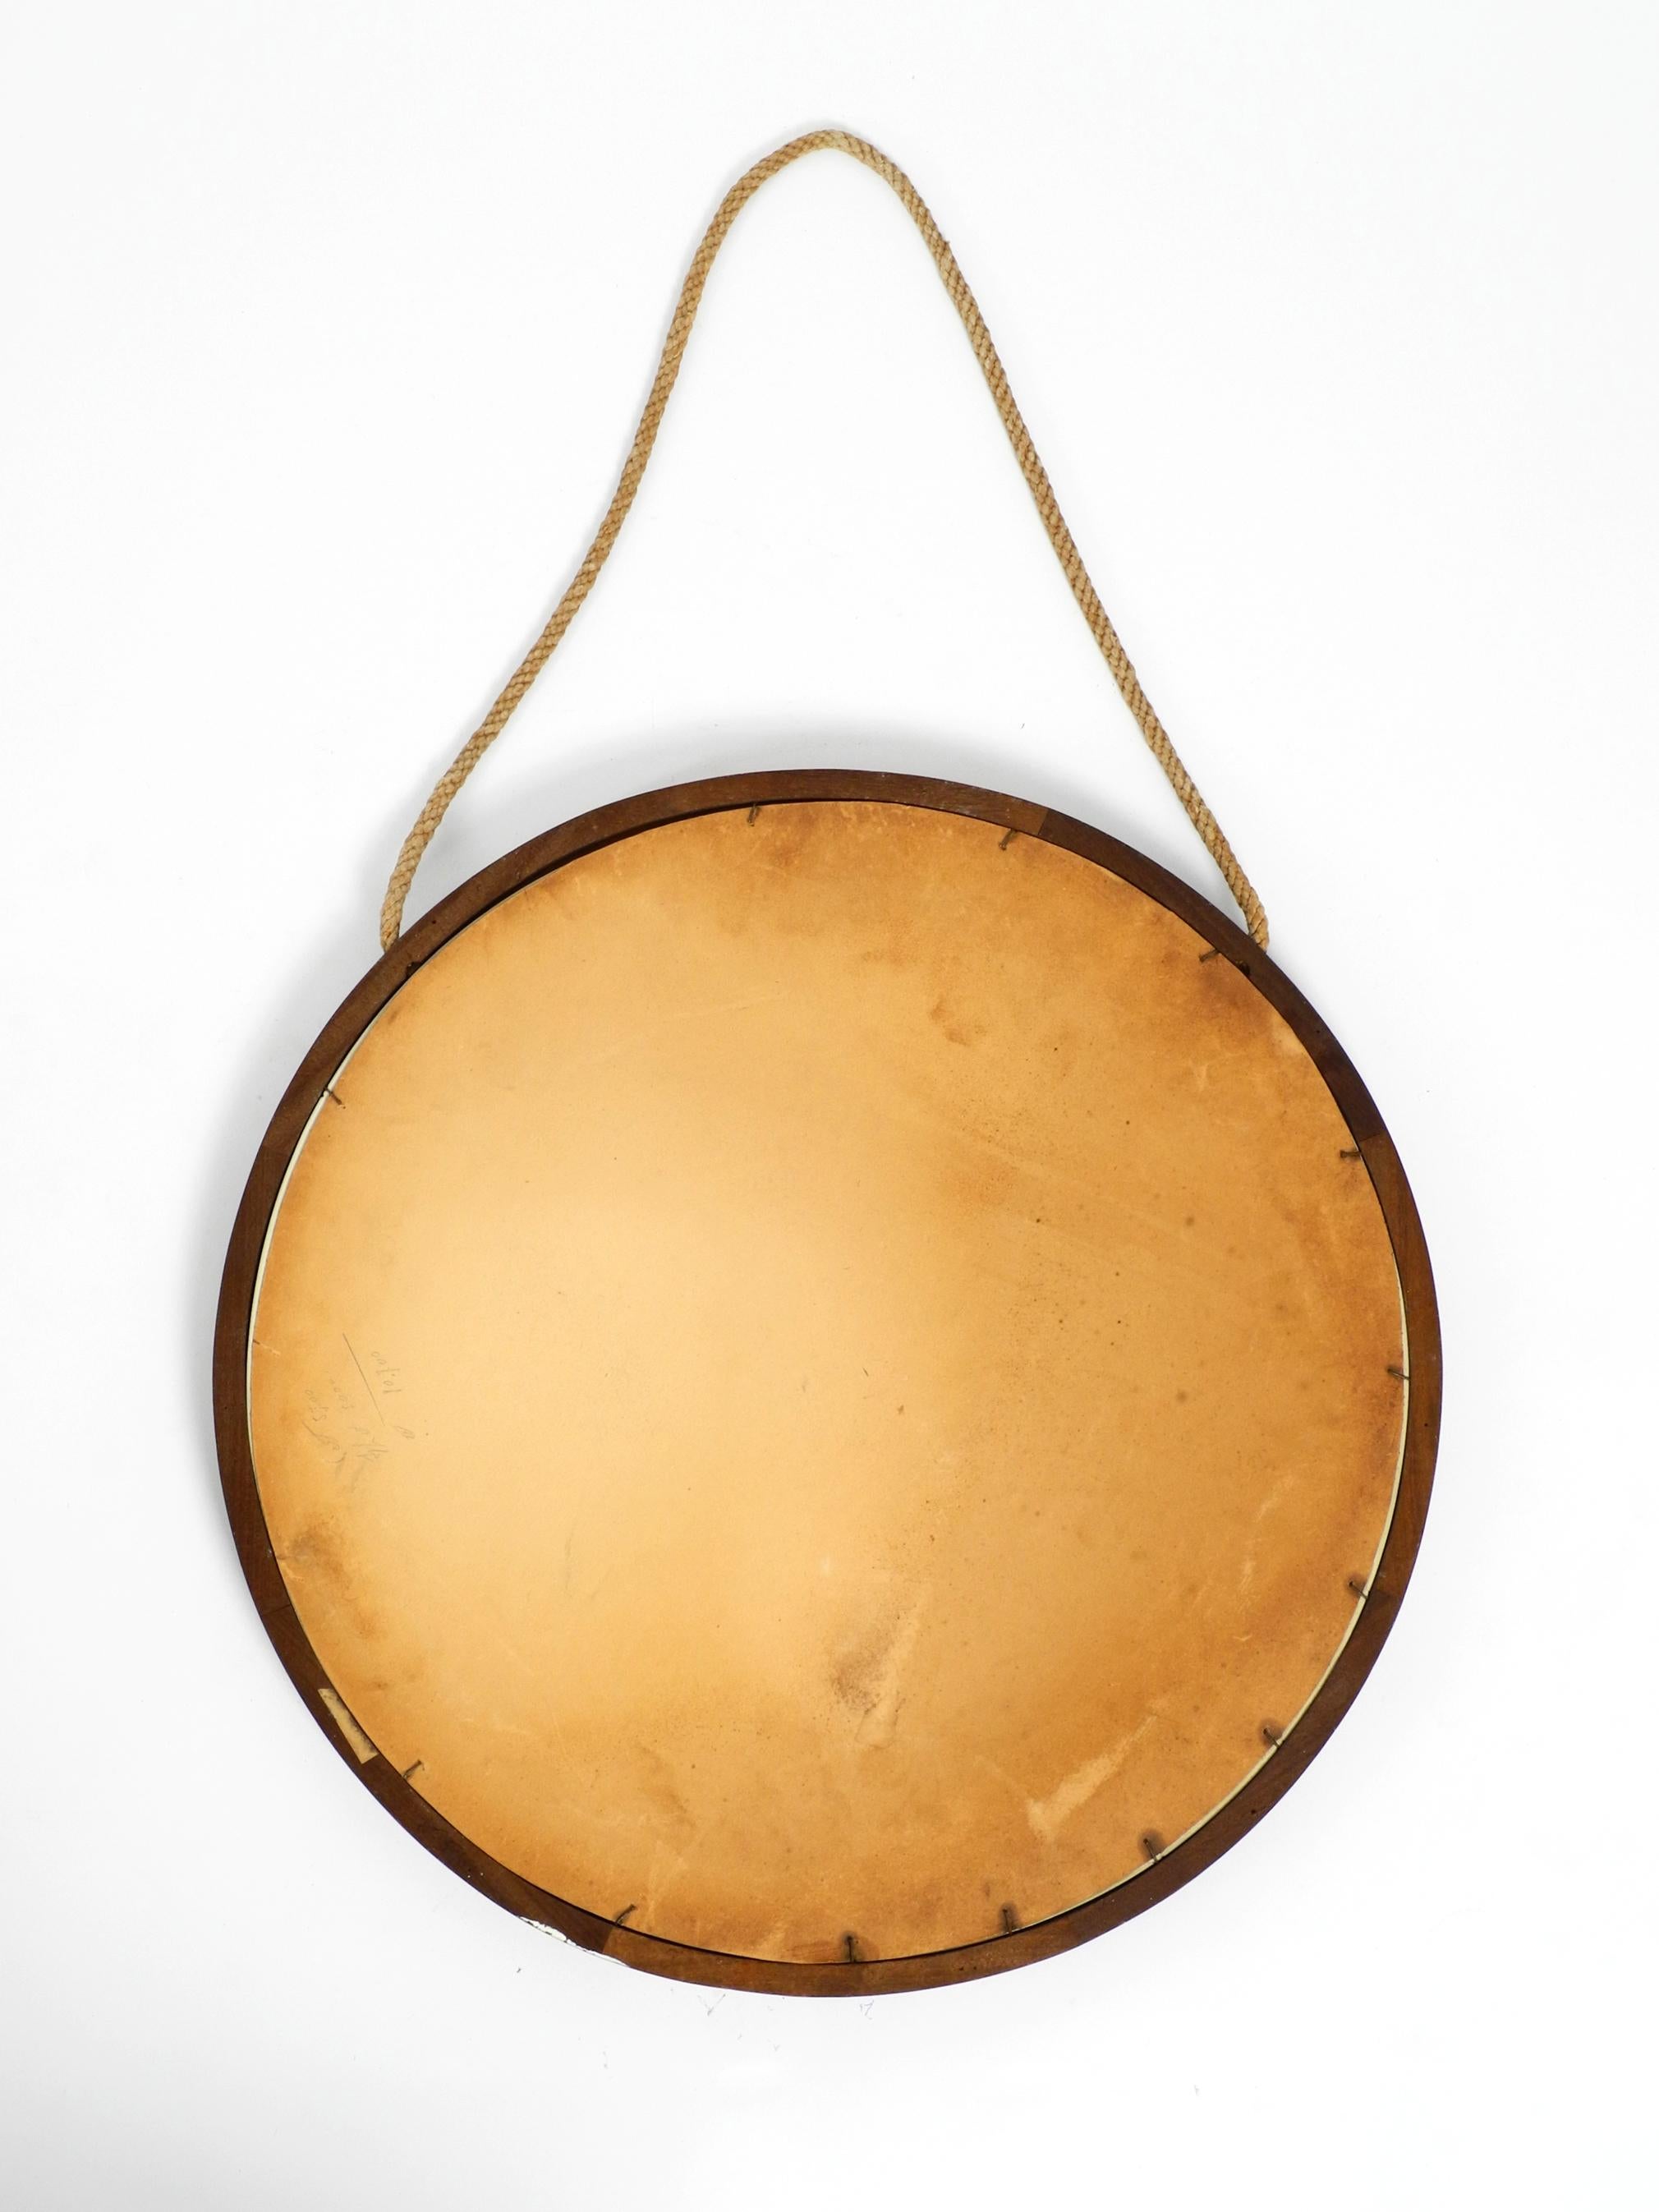 1960s Large Italian Teak Wall Mirror with Thick Rope Made of Natural Fiber 5